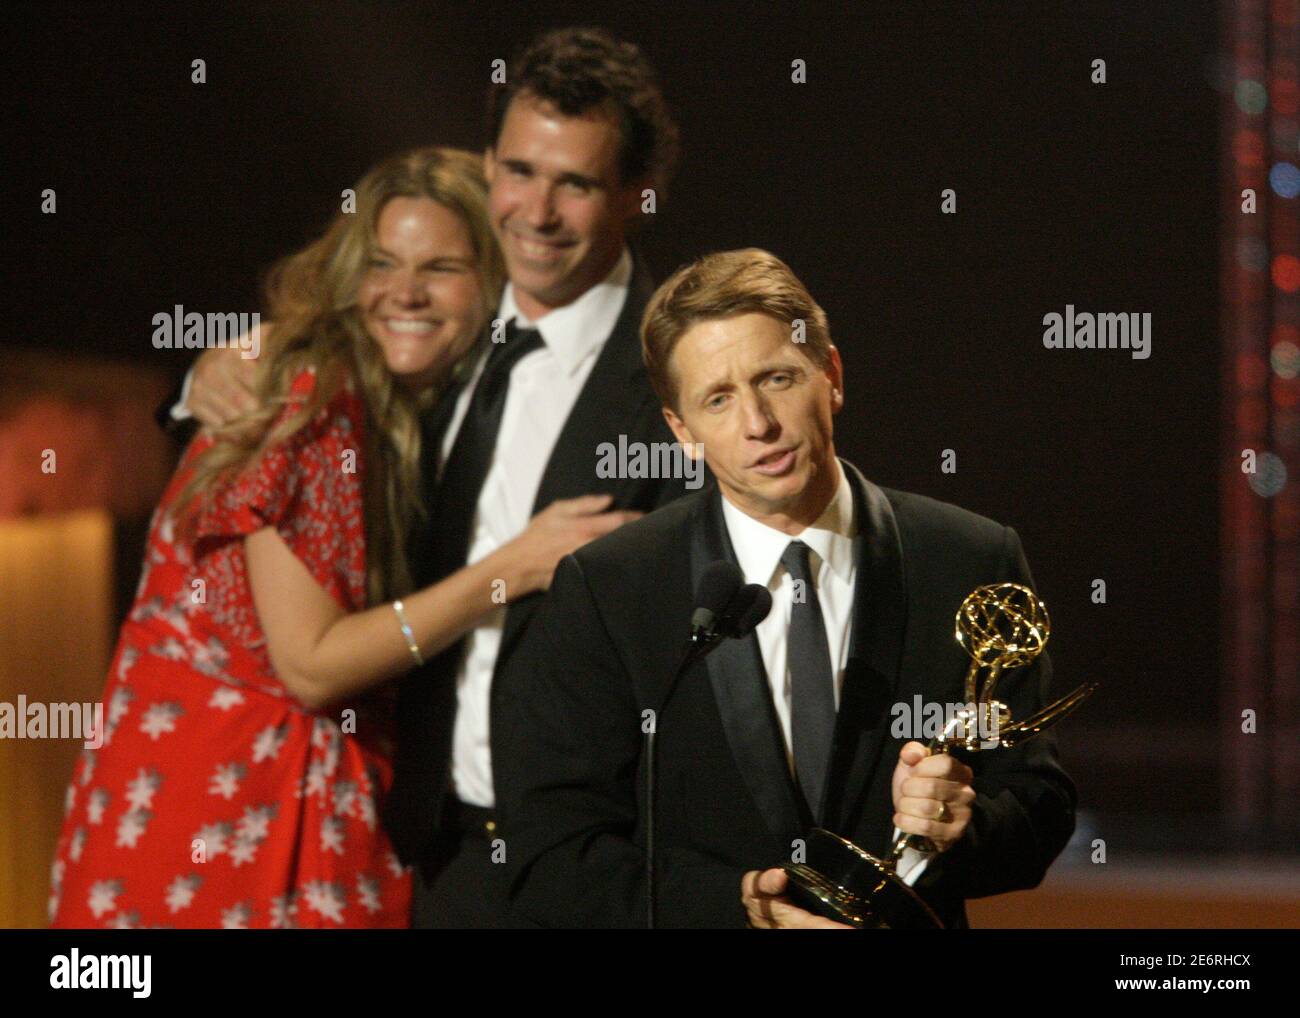 Bradley Bell, head writer for the Bold and the Beautiful, accepts the award for Outstanding Drama Series Writing Team during the 37th Annual Daytime Emmy Awards show at the Las Vegas Hilton in Las Vegas, Nevada June 27, 2010. REUTERS/Steve Marcus (UNITED STATES - Tags: ENTERTAINMENT) Stock Photo